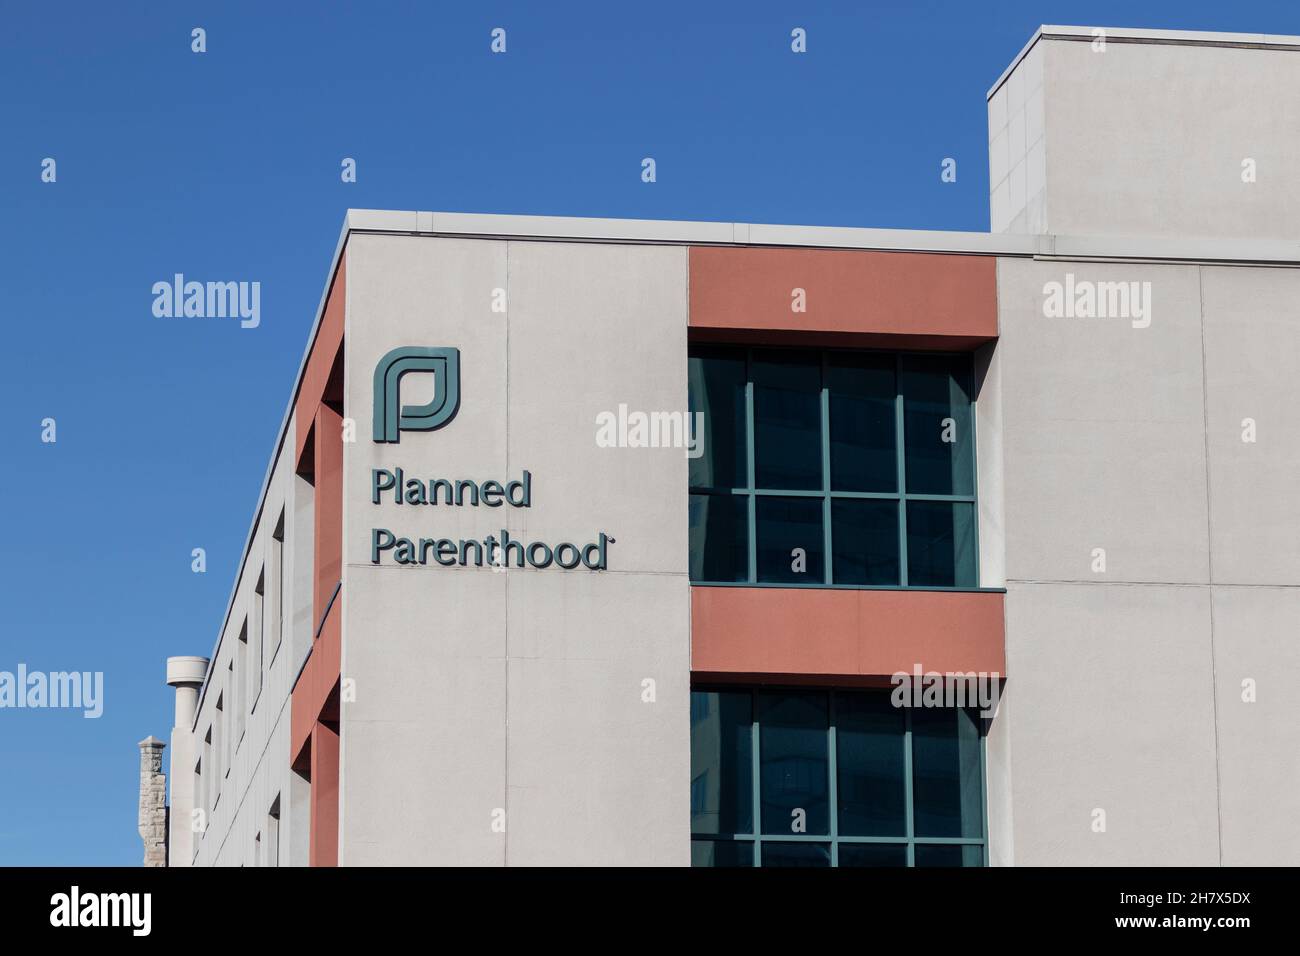 Dayton - Circa November 2021: Planned Parenthood location. Planned Parenthood provides reproductive health services in the US. Stock Photo